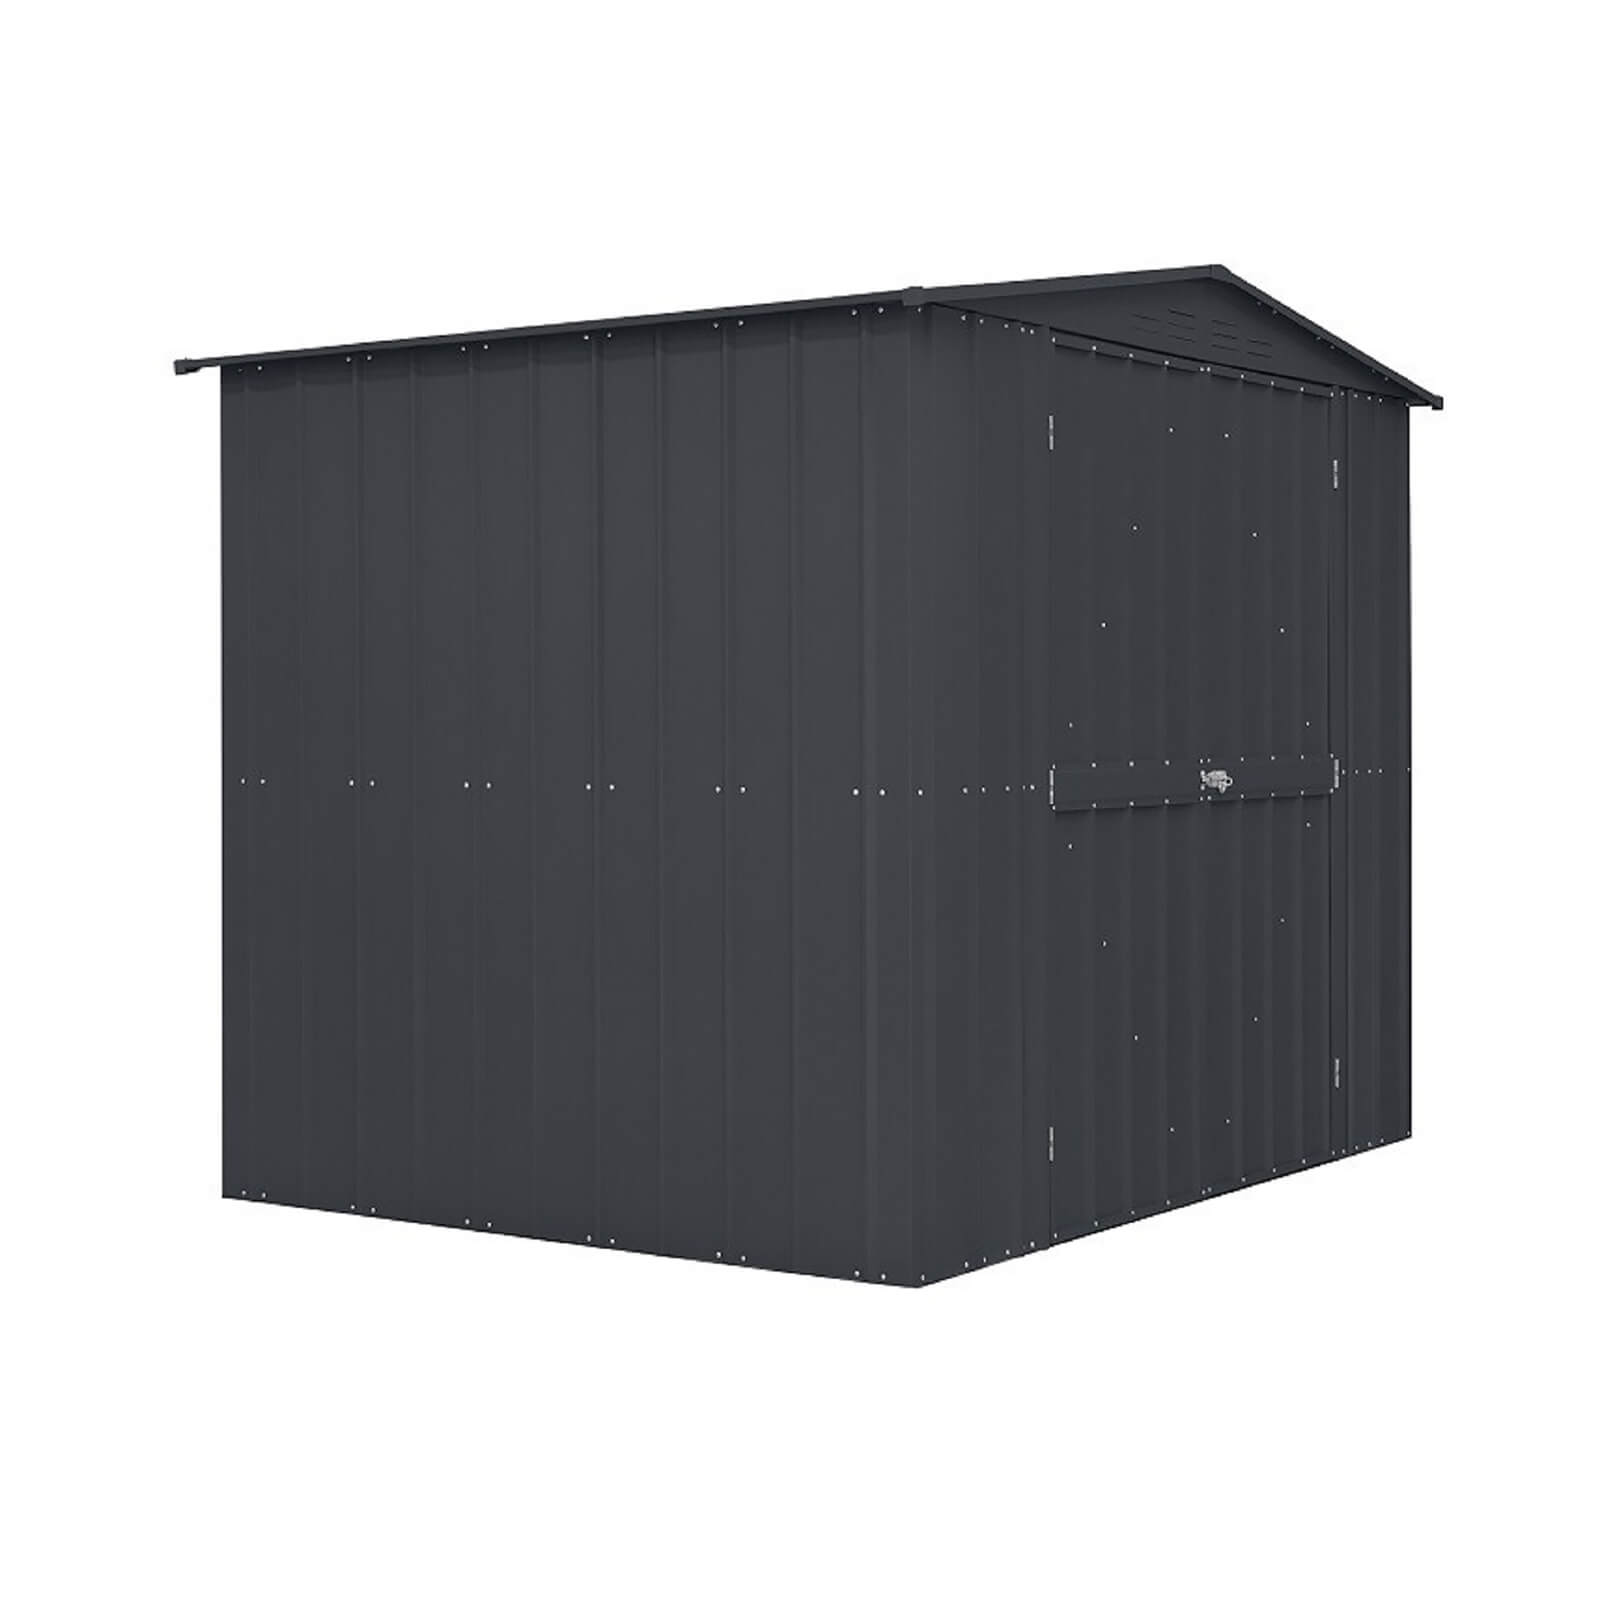 Lotus 8x6ft Mobility Metal Shed - Anthracite Grey